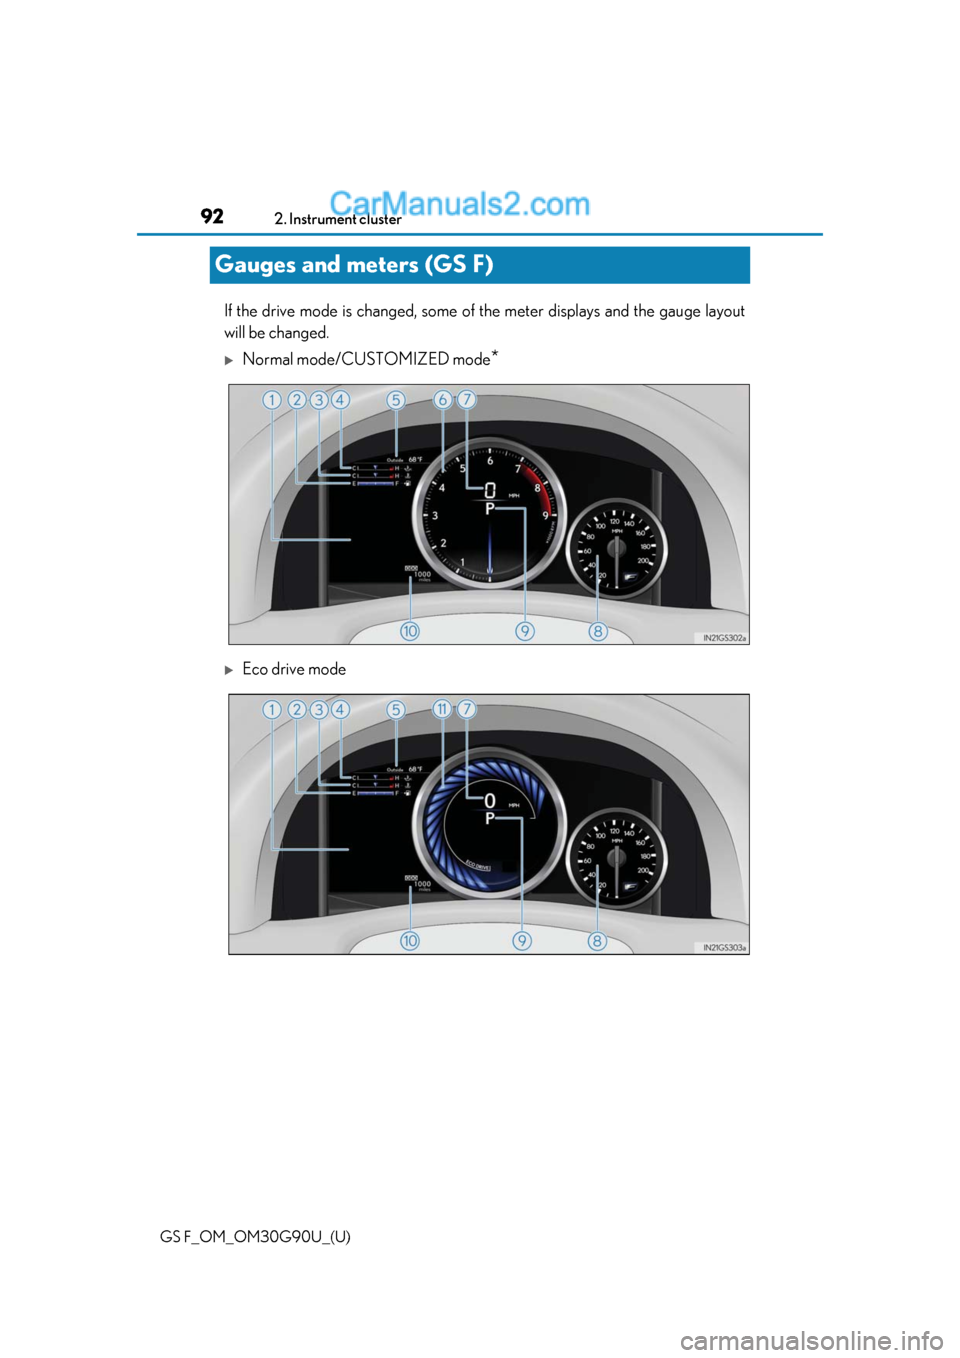 Lexus GS F 2019  s Owners Manual 92
GS F_OM_OM30G90U_(U)2. Instrument cluster
Gauges and meters (GS F)
If the drive mode is changed, some of
 the meter displays and the gauge layout
will be changed.
Normal mode/CUSTOMIZED mode*
�